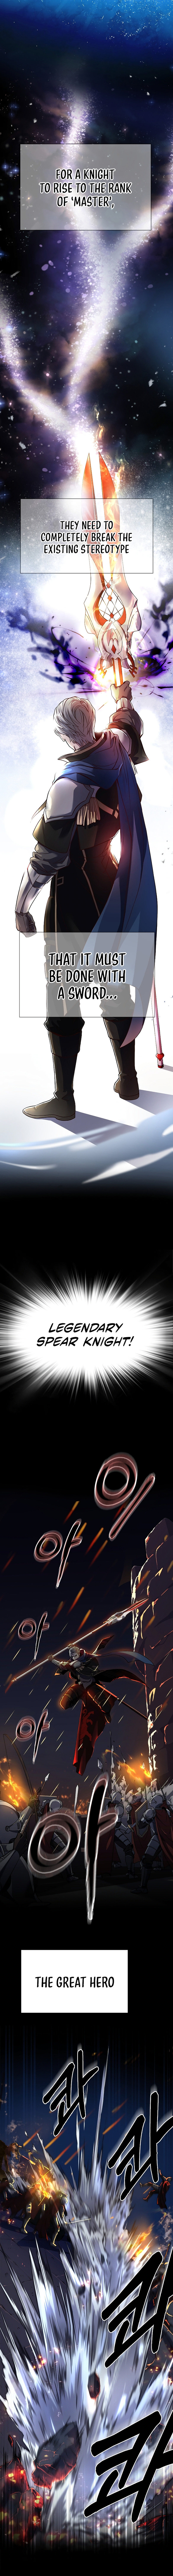 Return of the Legendary Spear Knight - Chapter 1 Page 2